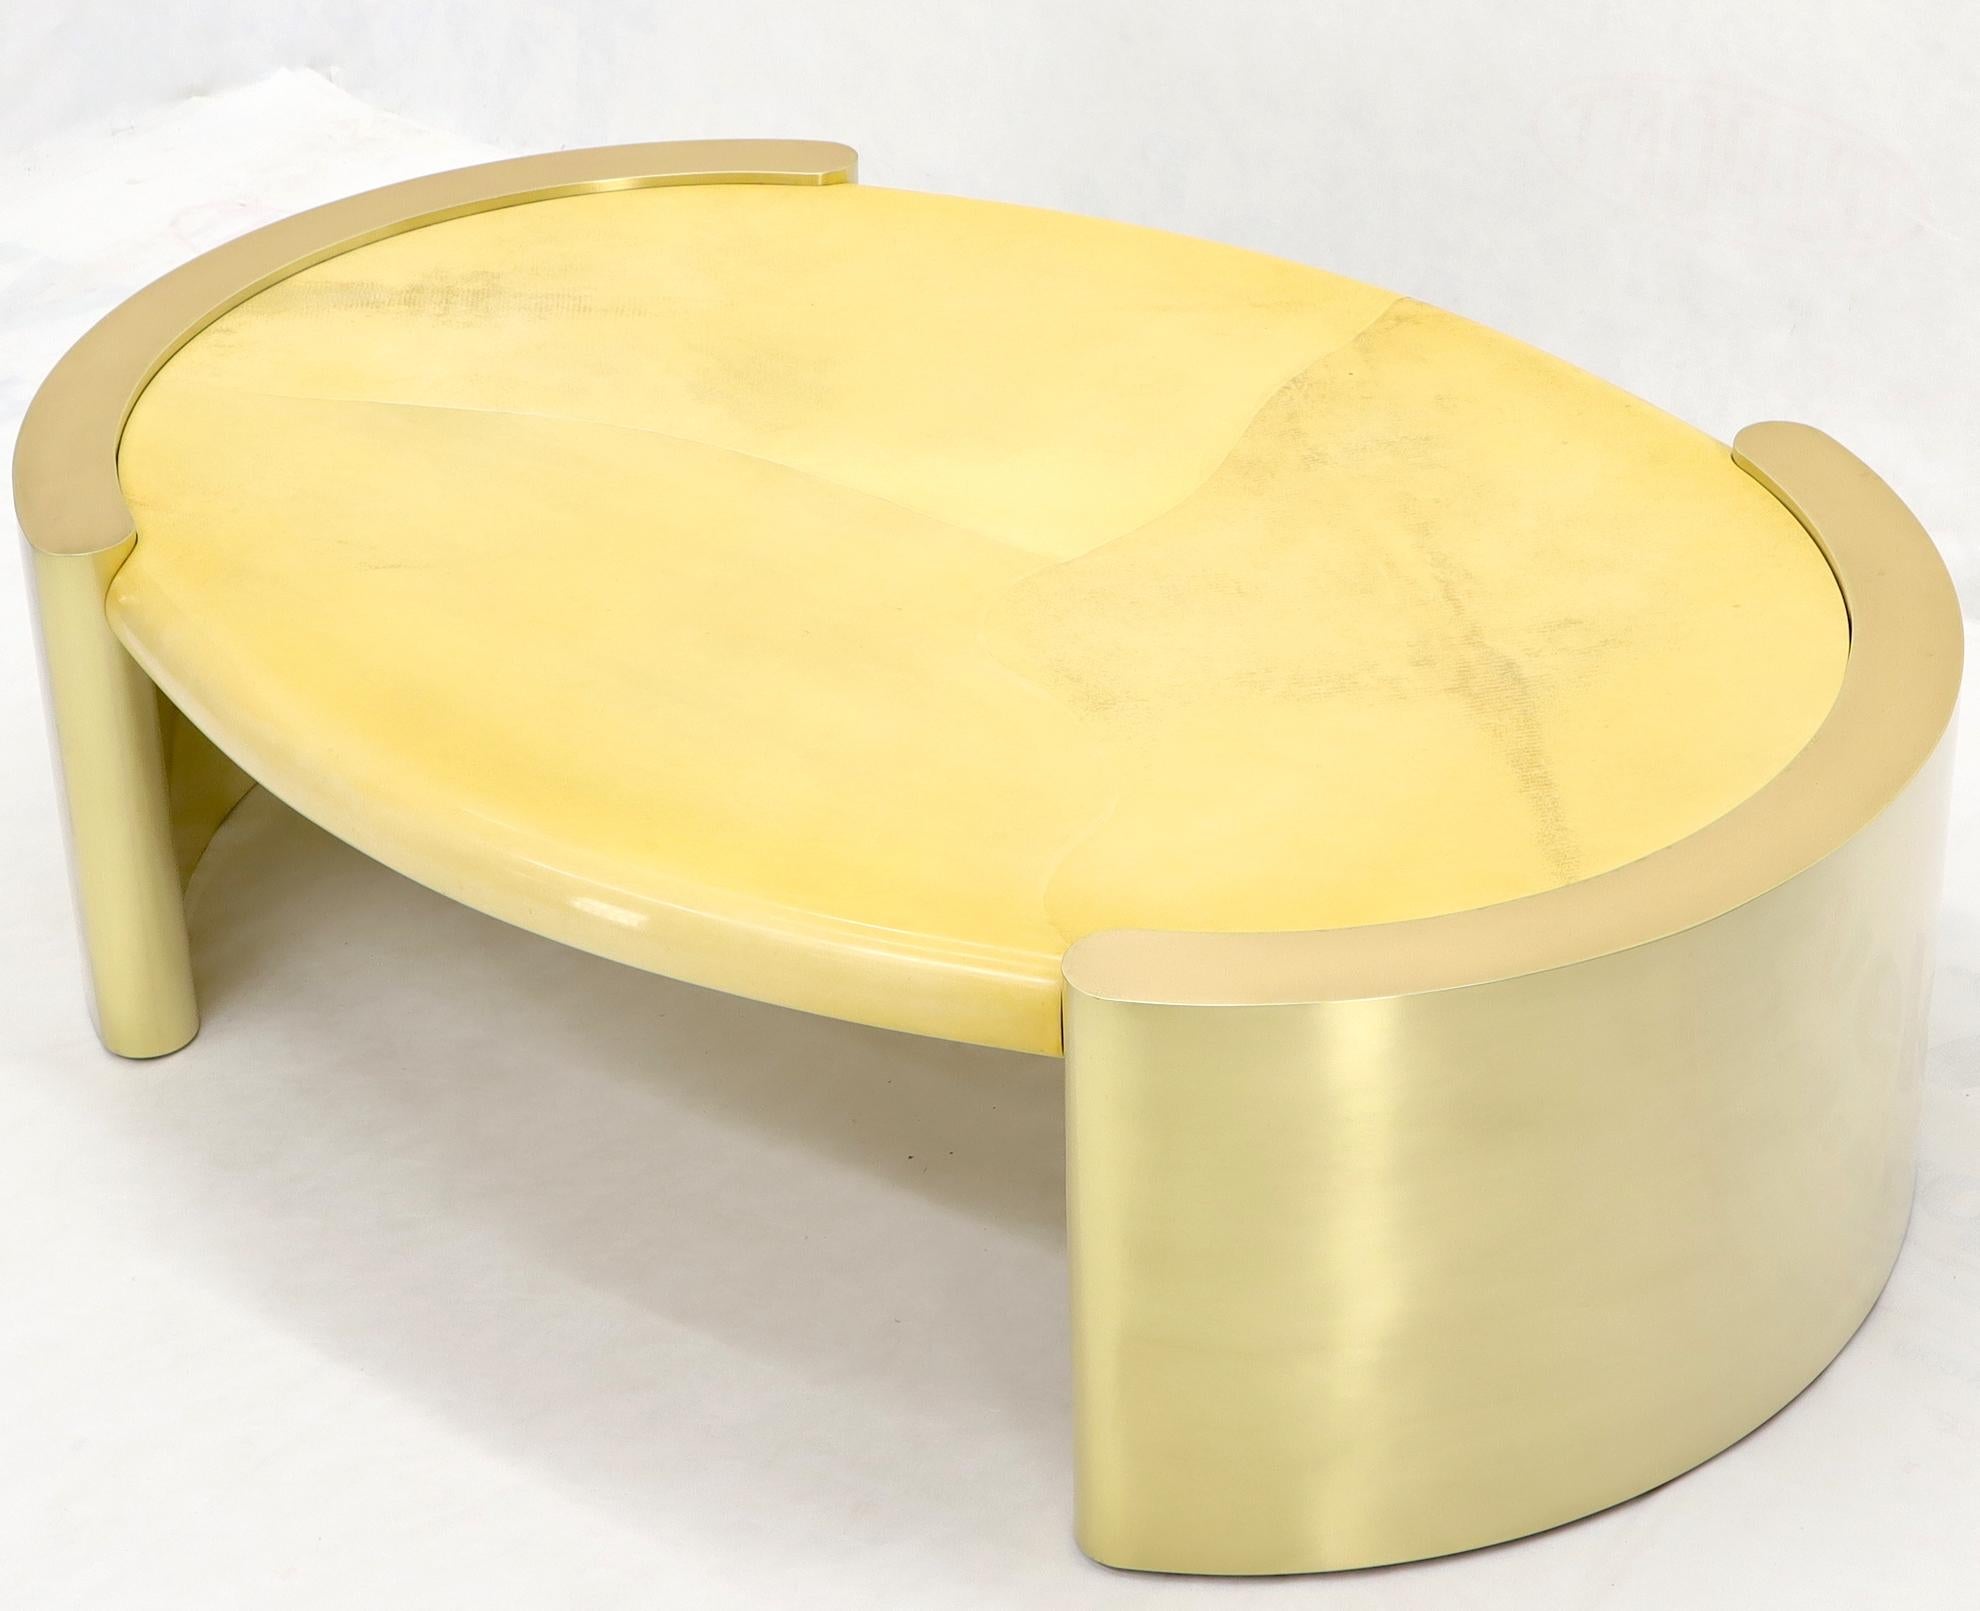 20th Century Forged Rounded Brass Base Oval Goat Skin Top Mid-Century Modern Coffee Table For Sale